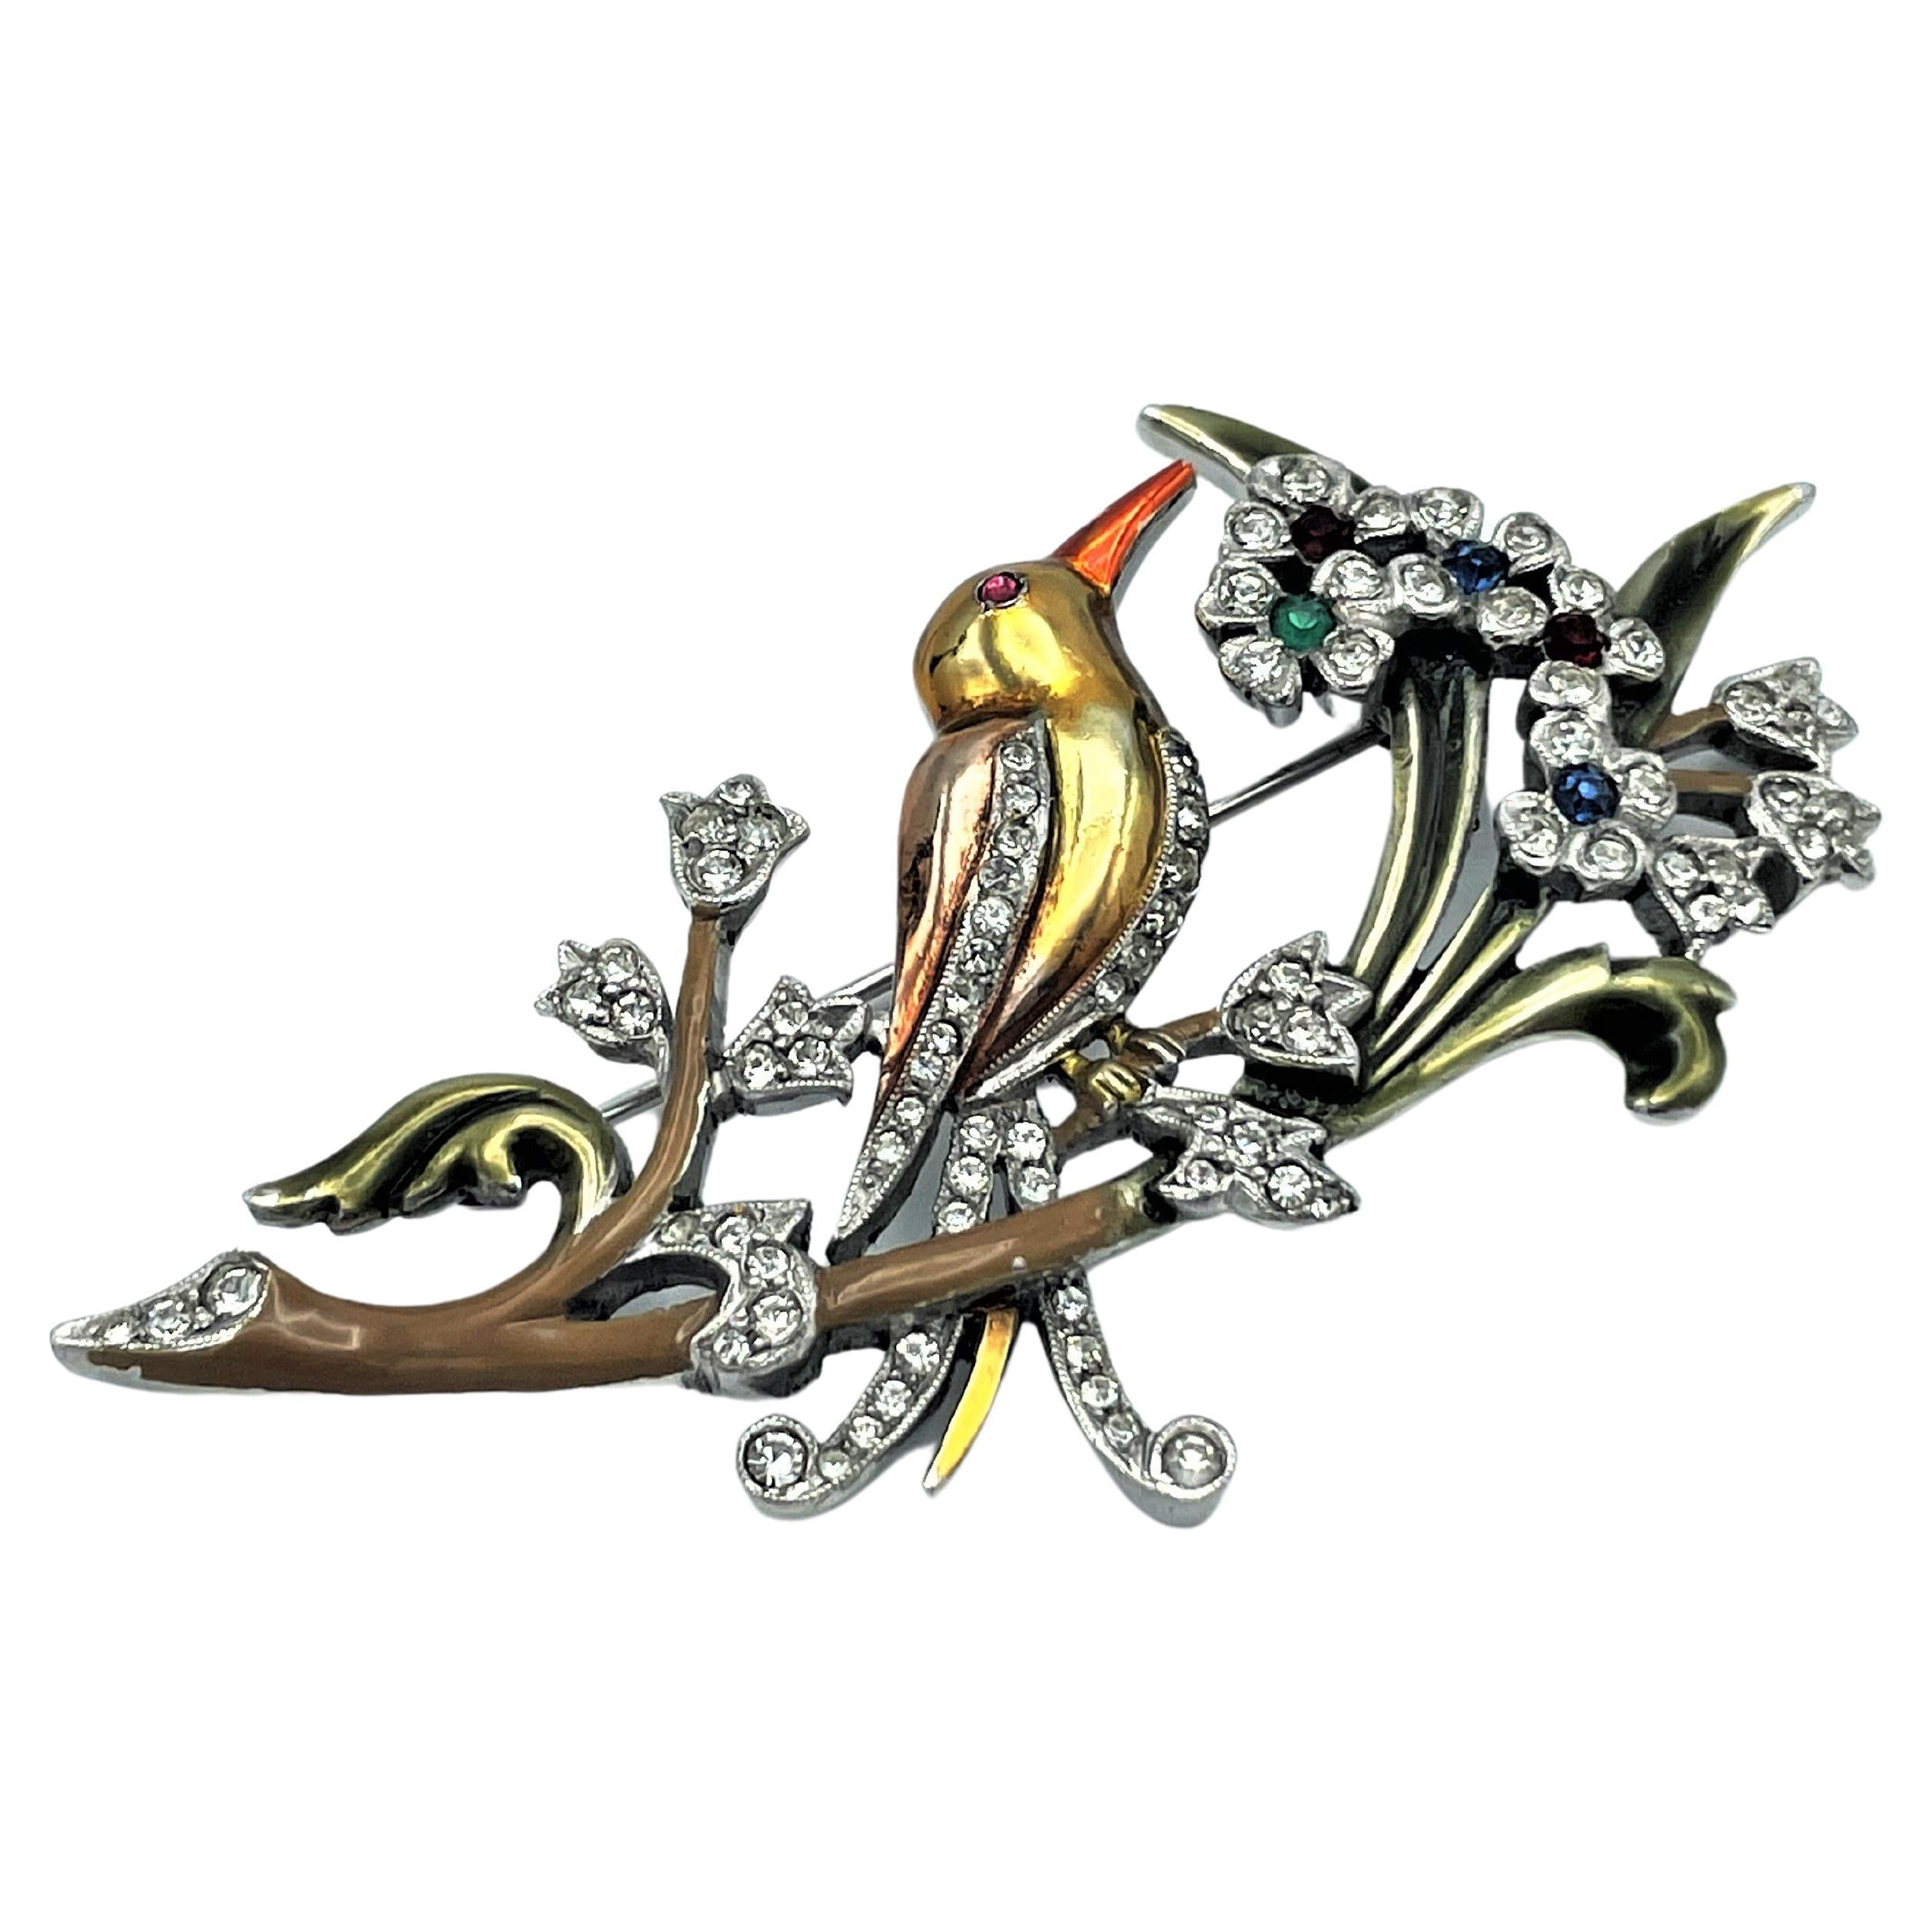 About
A very rare DUJAY brooch, a bird on the branches with flower, rhinestones and enamel 
Measurement: 
With:   2,76 inches ( 7 cm )
Hight:  1,46 inches ( 3,7 cm)
Features:
- Material: Rhodium, hand setting small rhinestones
- unsigned DUJAY
-